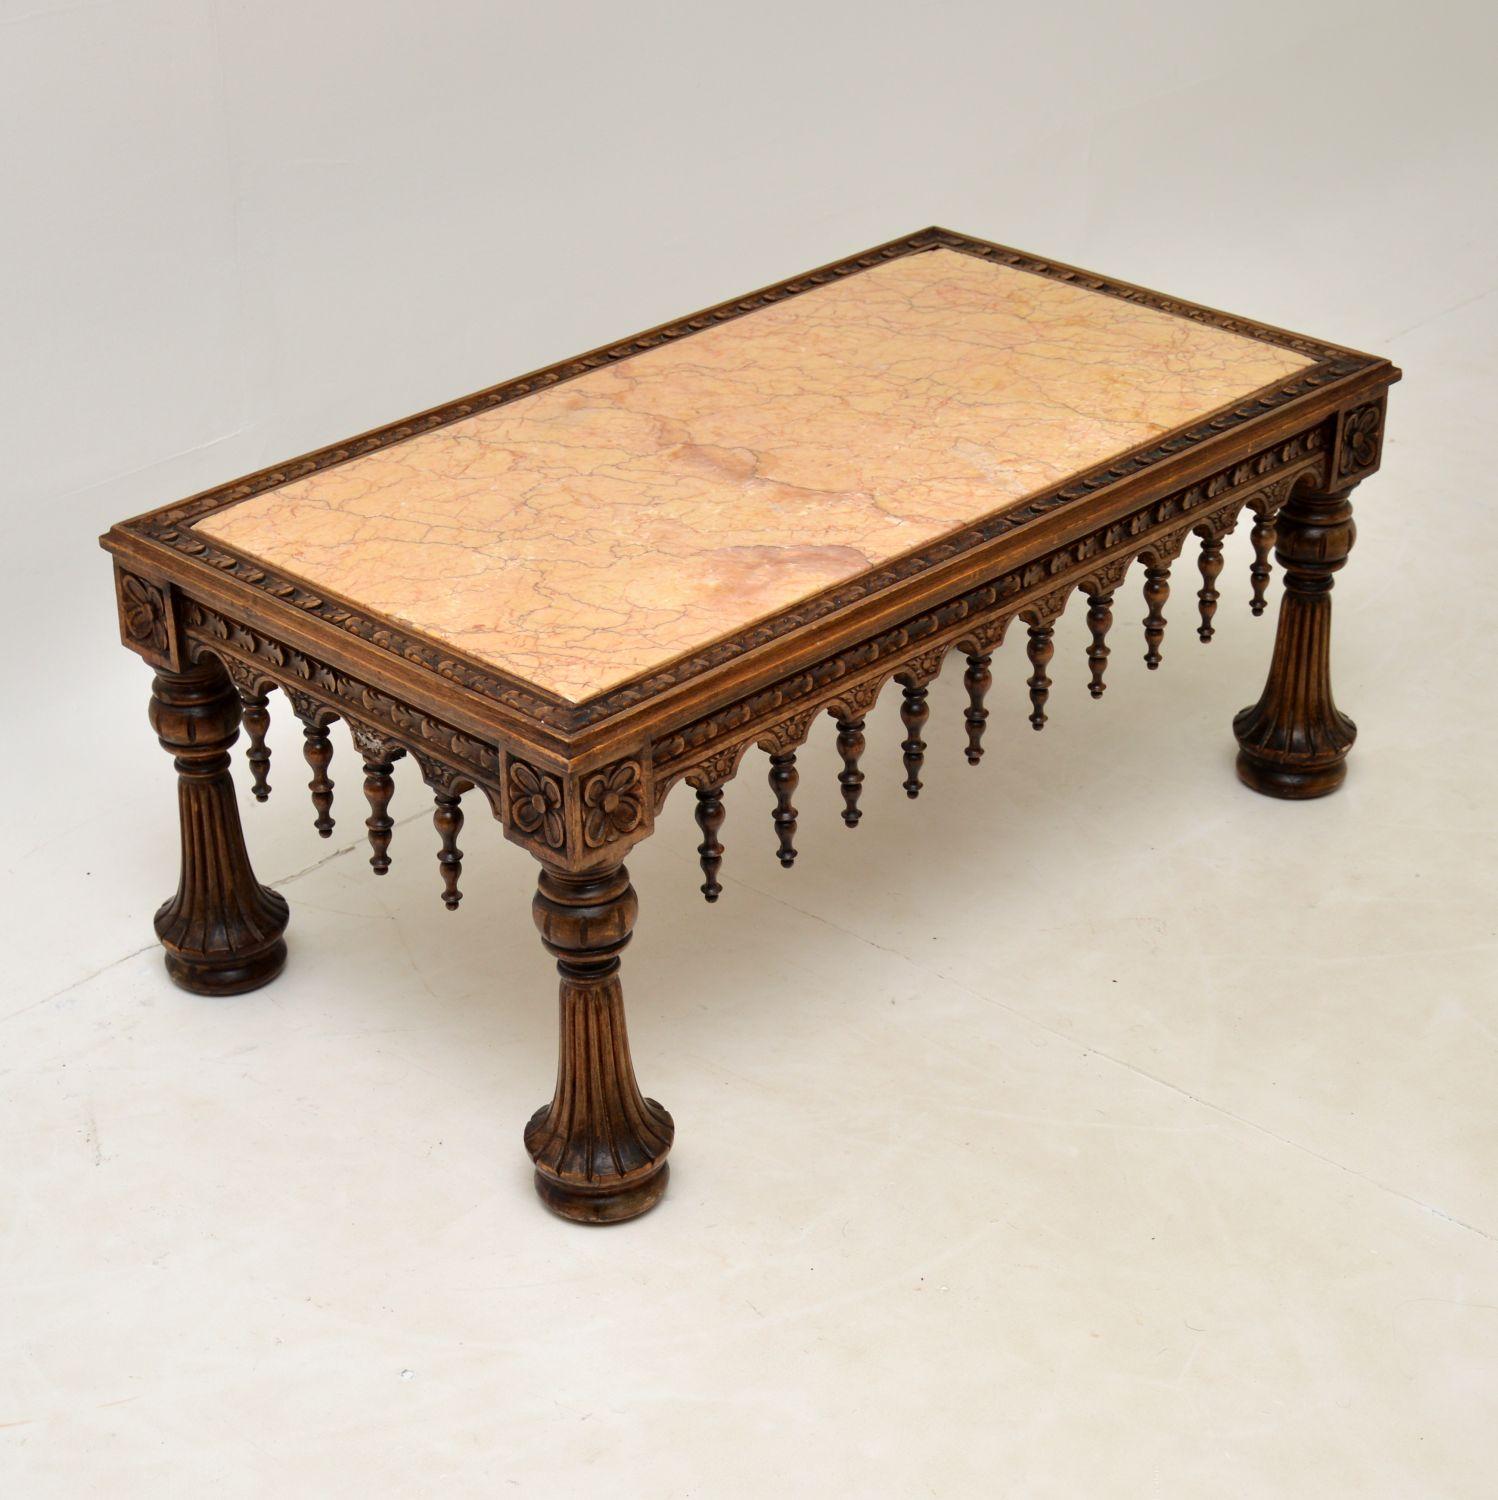 A beautifully striking antique marble top coffee table, which I would date to around the 1890-1910 period. It has a Moorish influence and was possibly made in Spain or it could be Colonial.

The frame is spectacularly carved from solid oak or